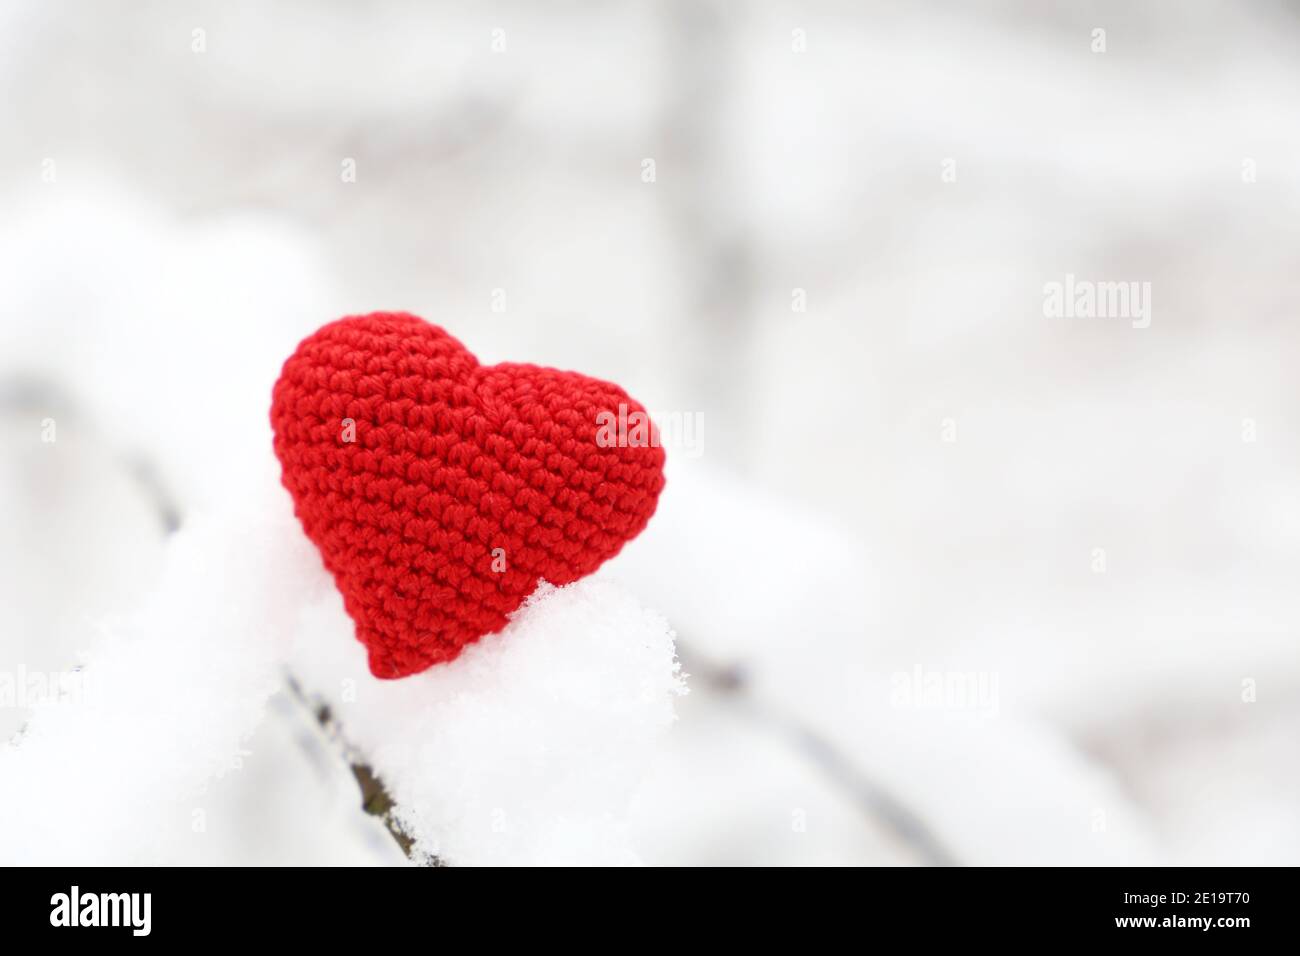 Valentine heart in winter forest, cold weather. Red knitted heart on snow covered branch, symbol of romantic love, background for holiday Stock Photo